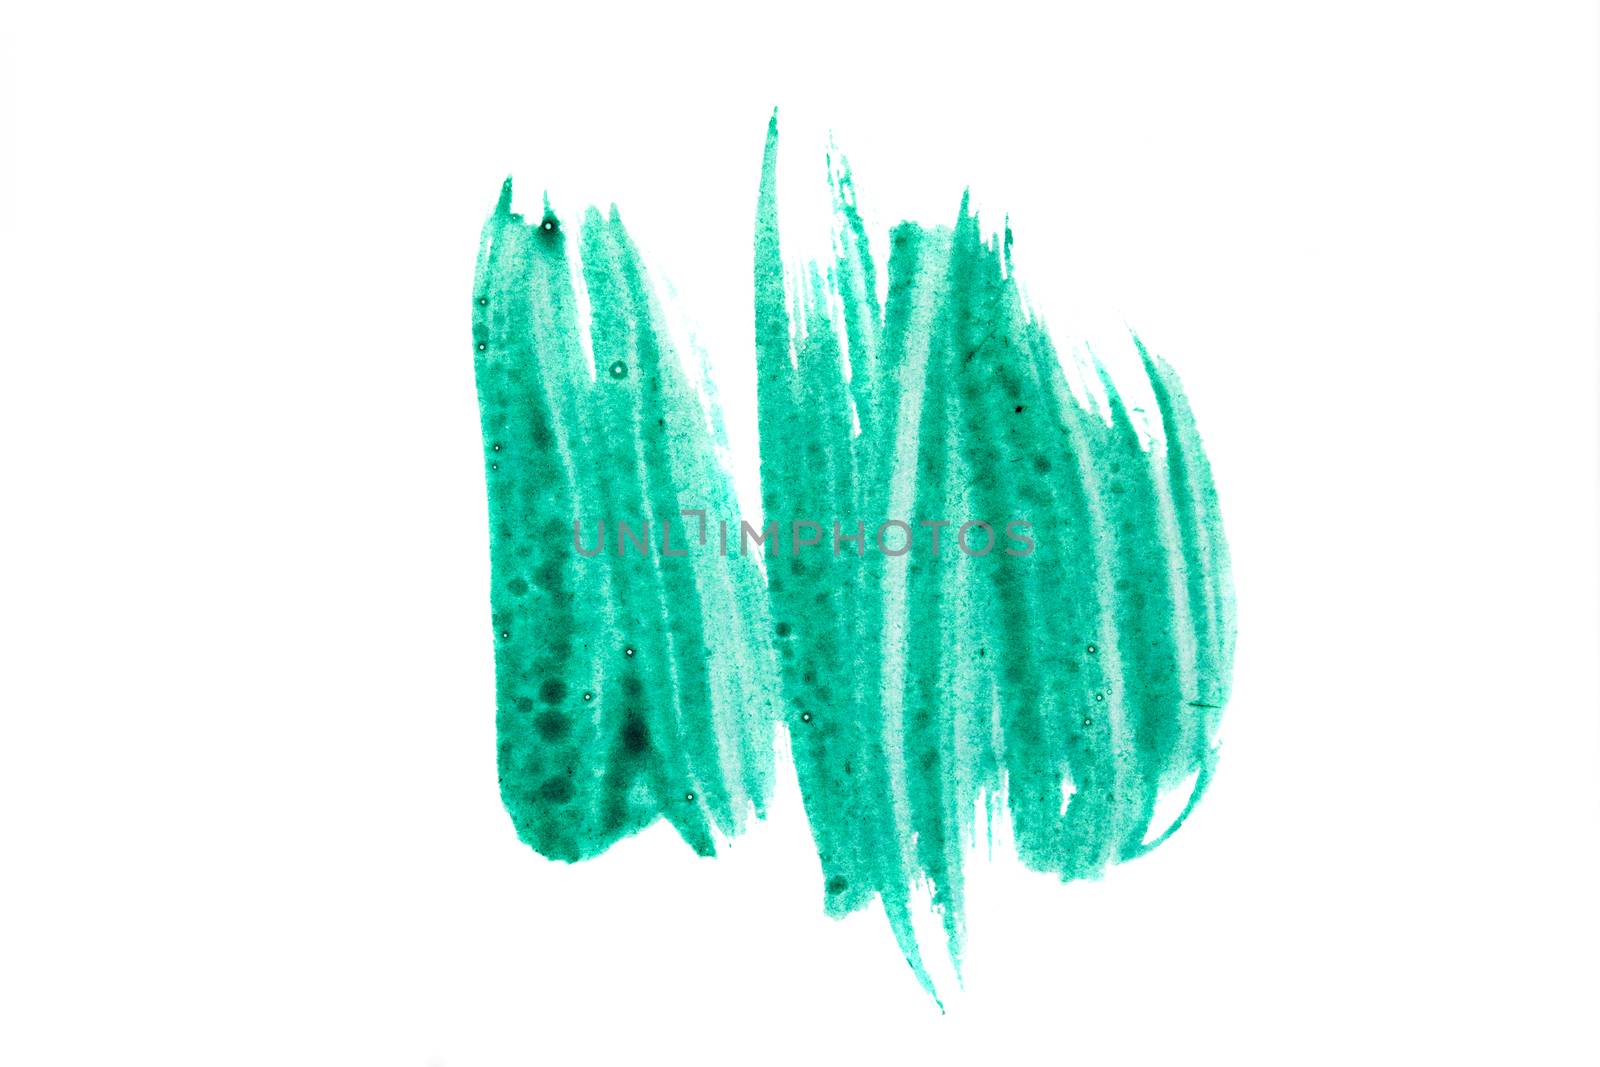 painted with a brush paint, isolated on white background, drawing green